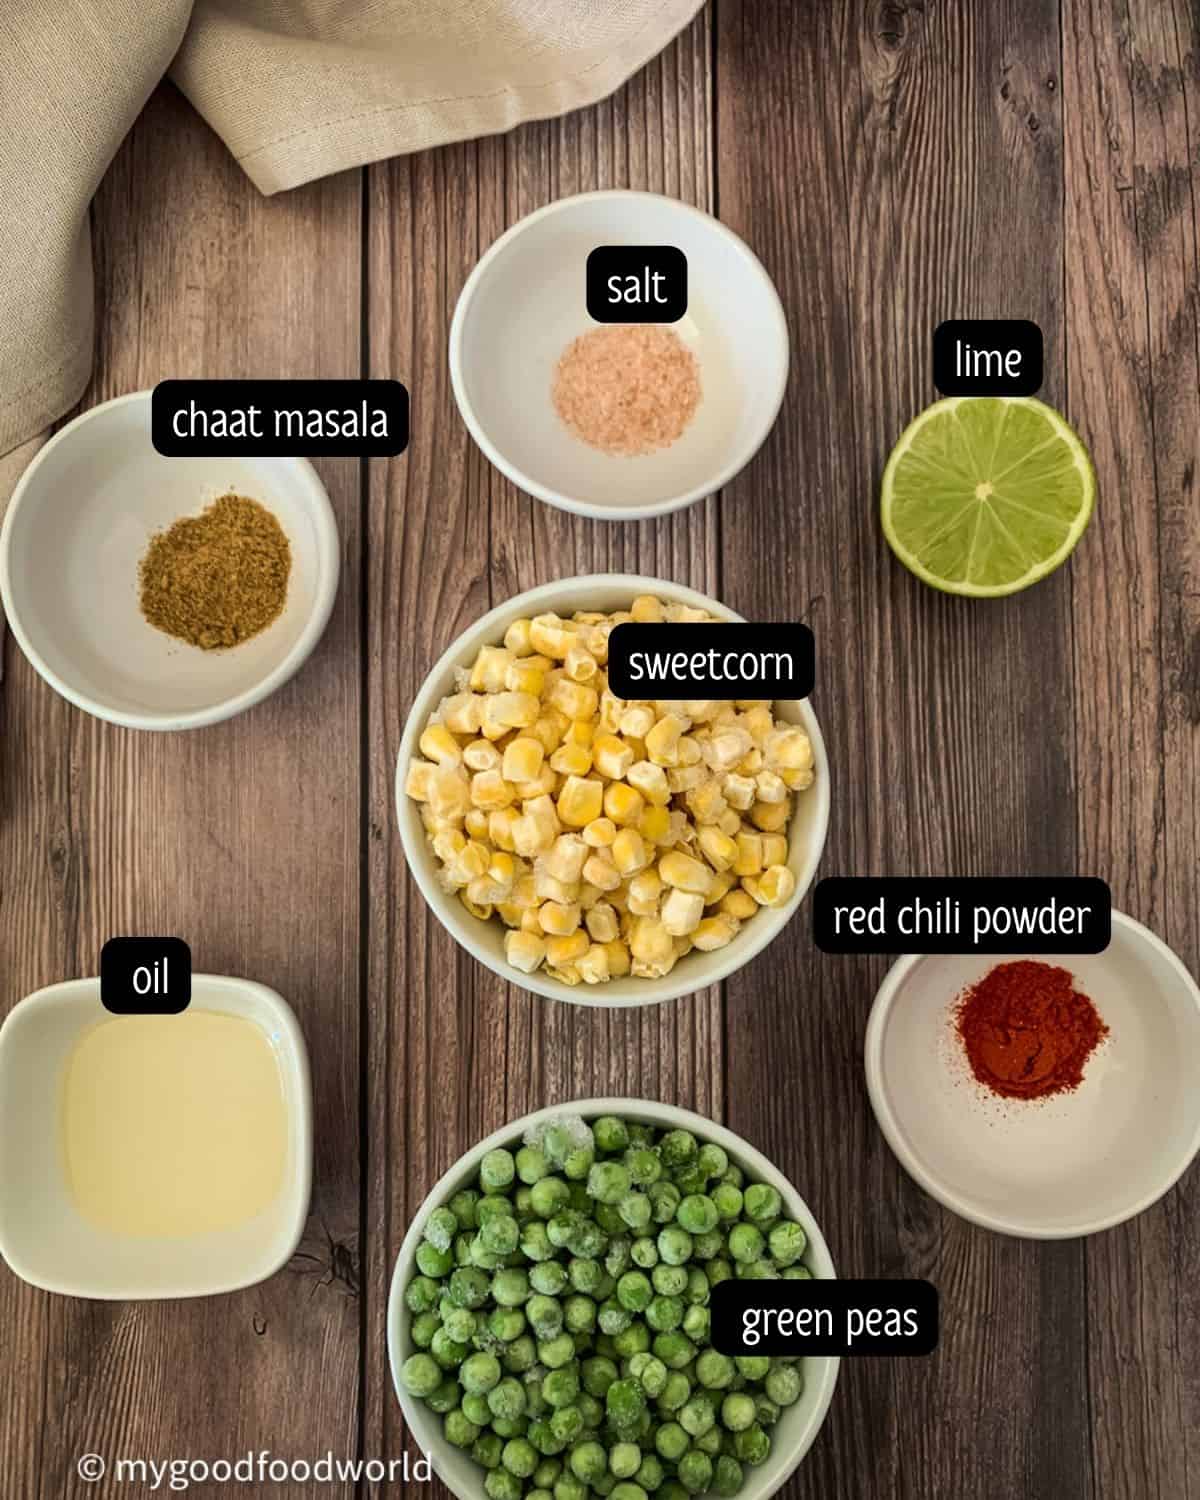 Ingredients for peas and corn salad are placed in white bowls which are placed on a dark brown textured backdrop.